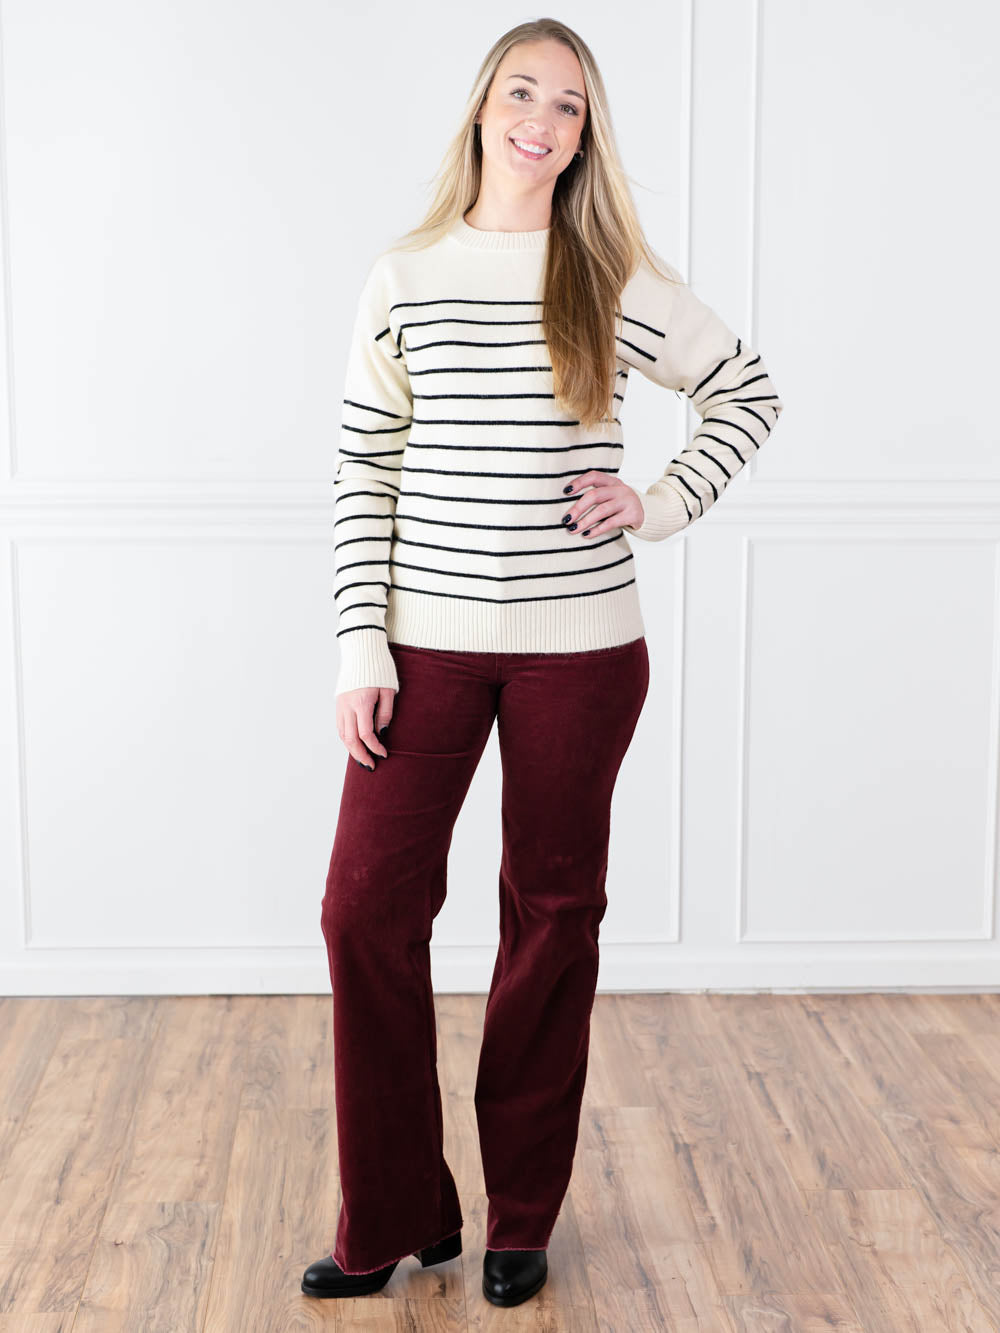 Striped Sweater Outfit for Tall Women